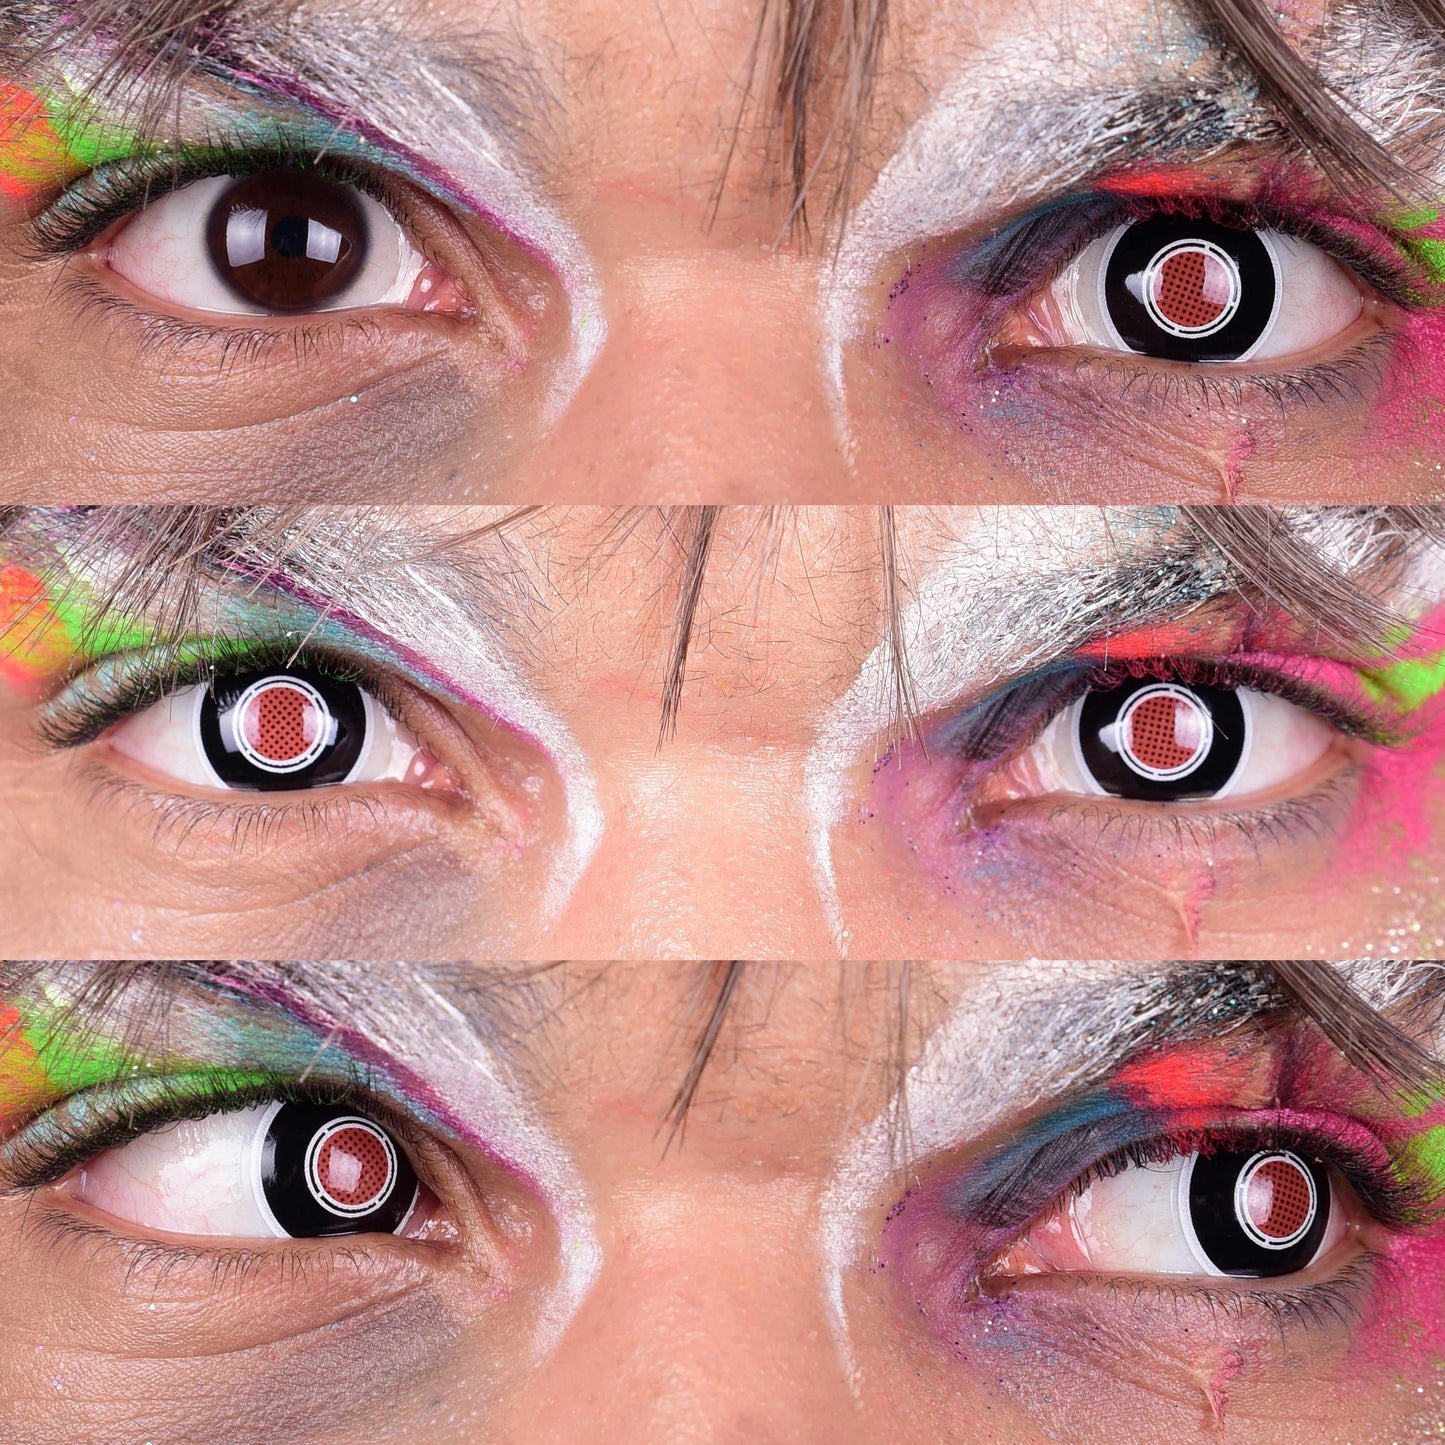 PRIMAL ® Terminator II - Grey & Red Colored Contact Lenses